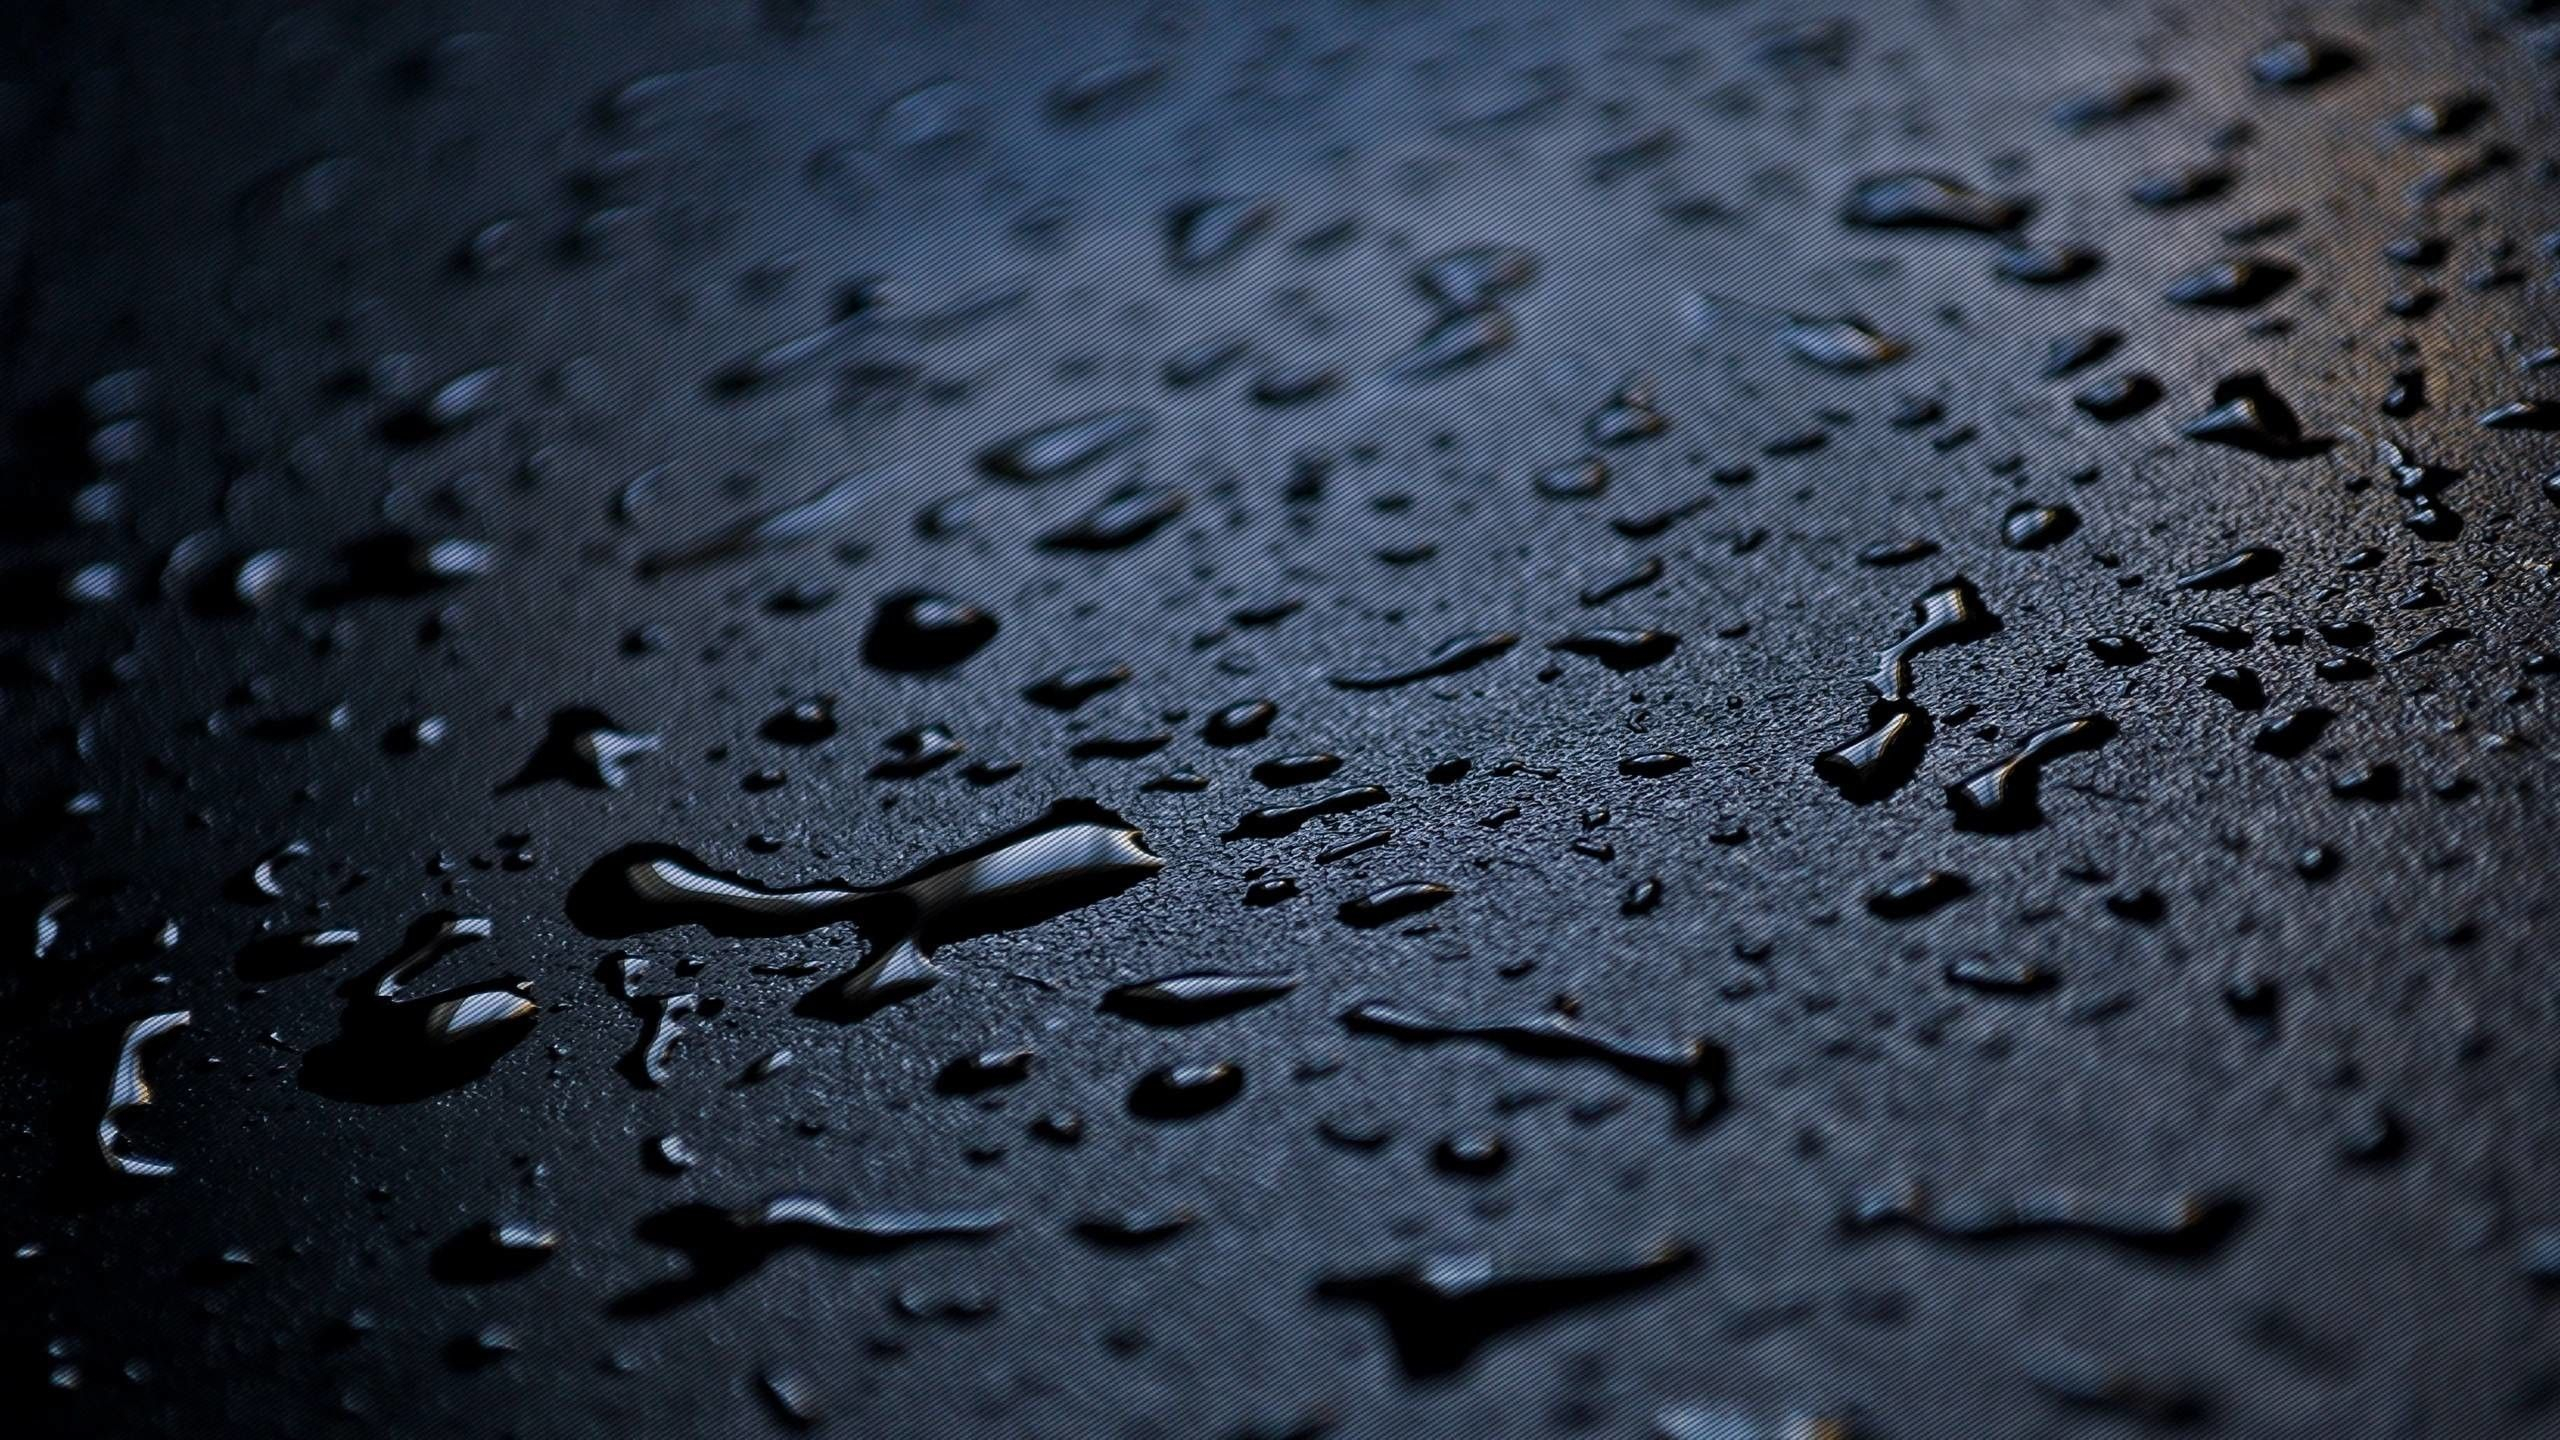 2560x1440 Raindrops Wallpapers Top Free Raindrops Backgrounds